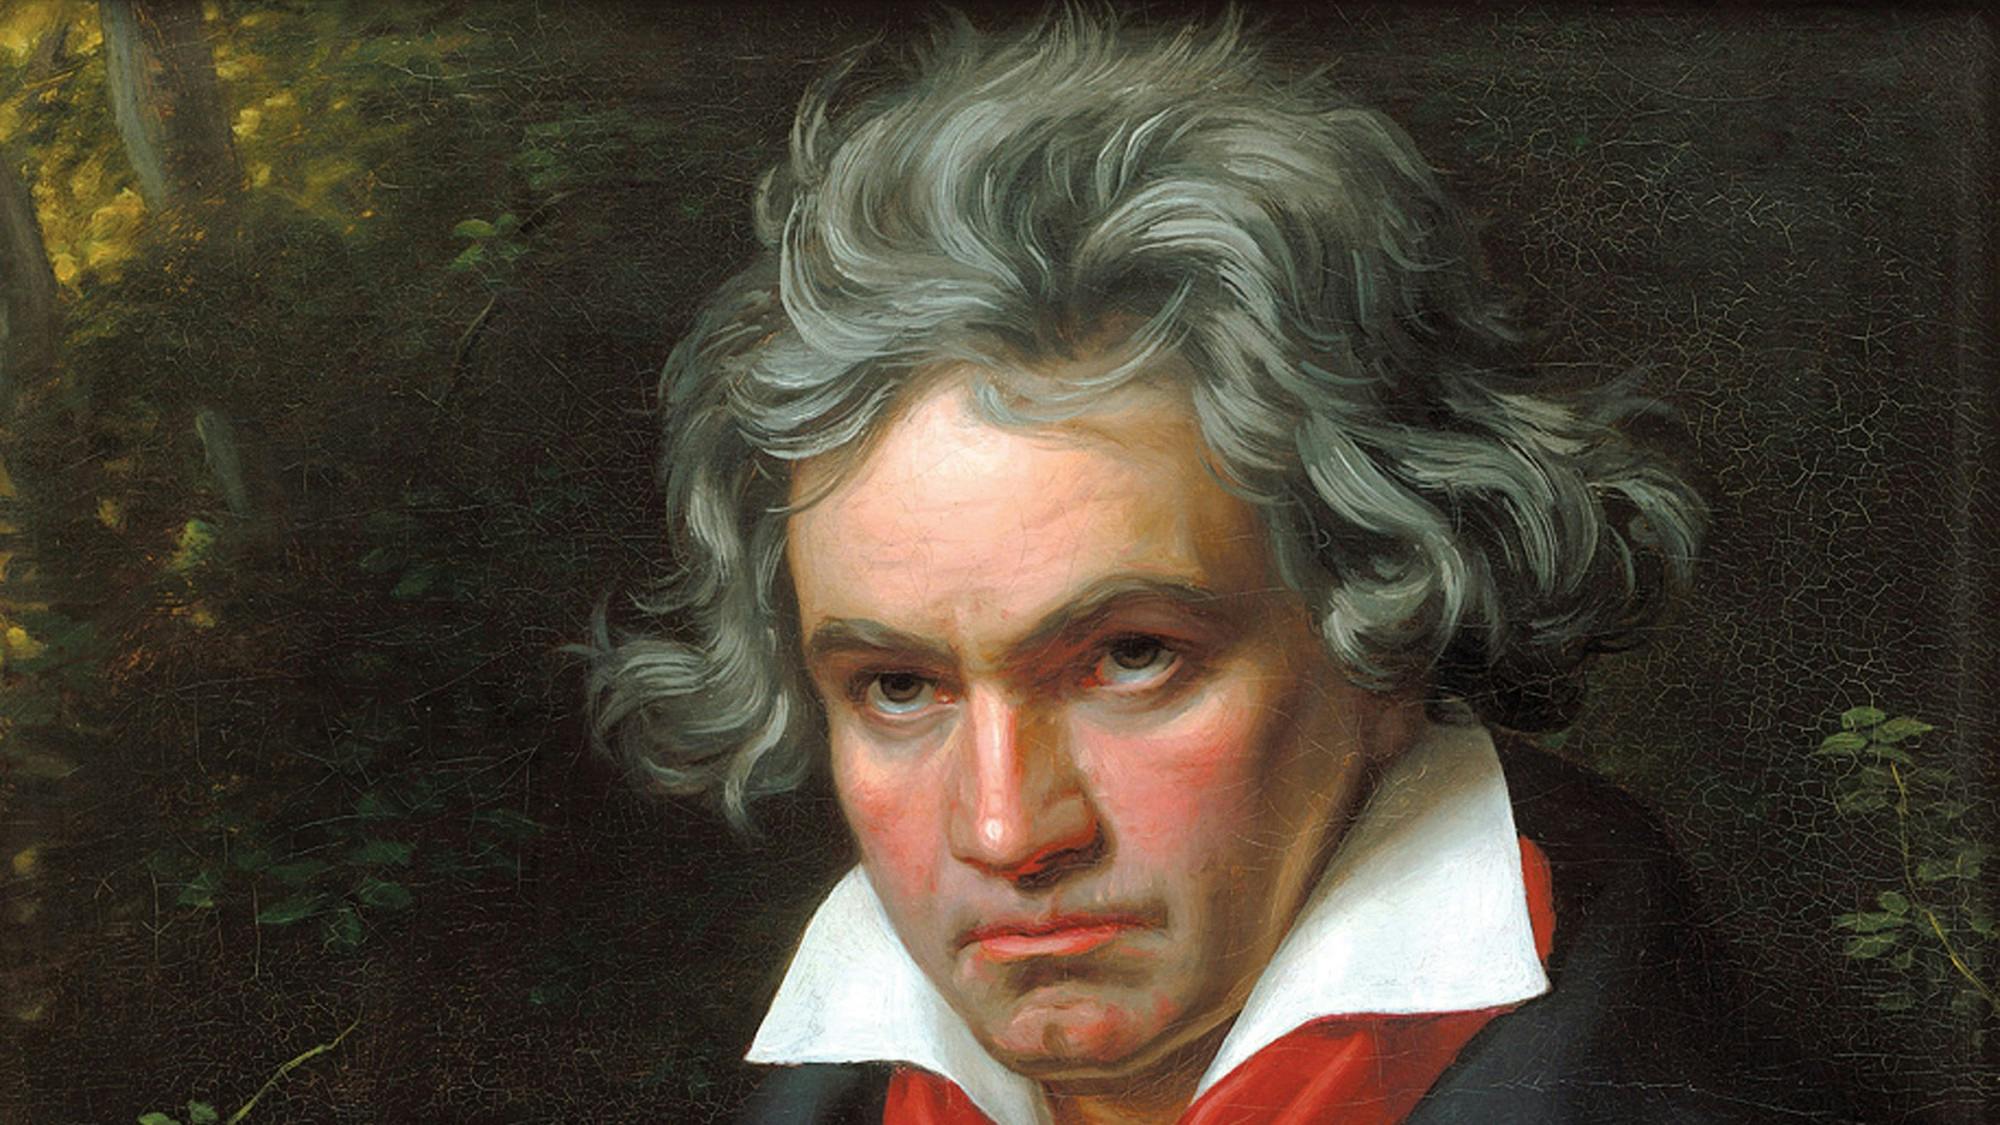 beethoven 7th symphony 2nd movement wiki